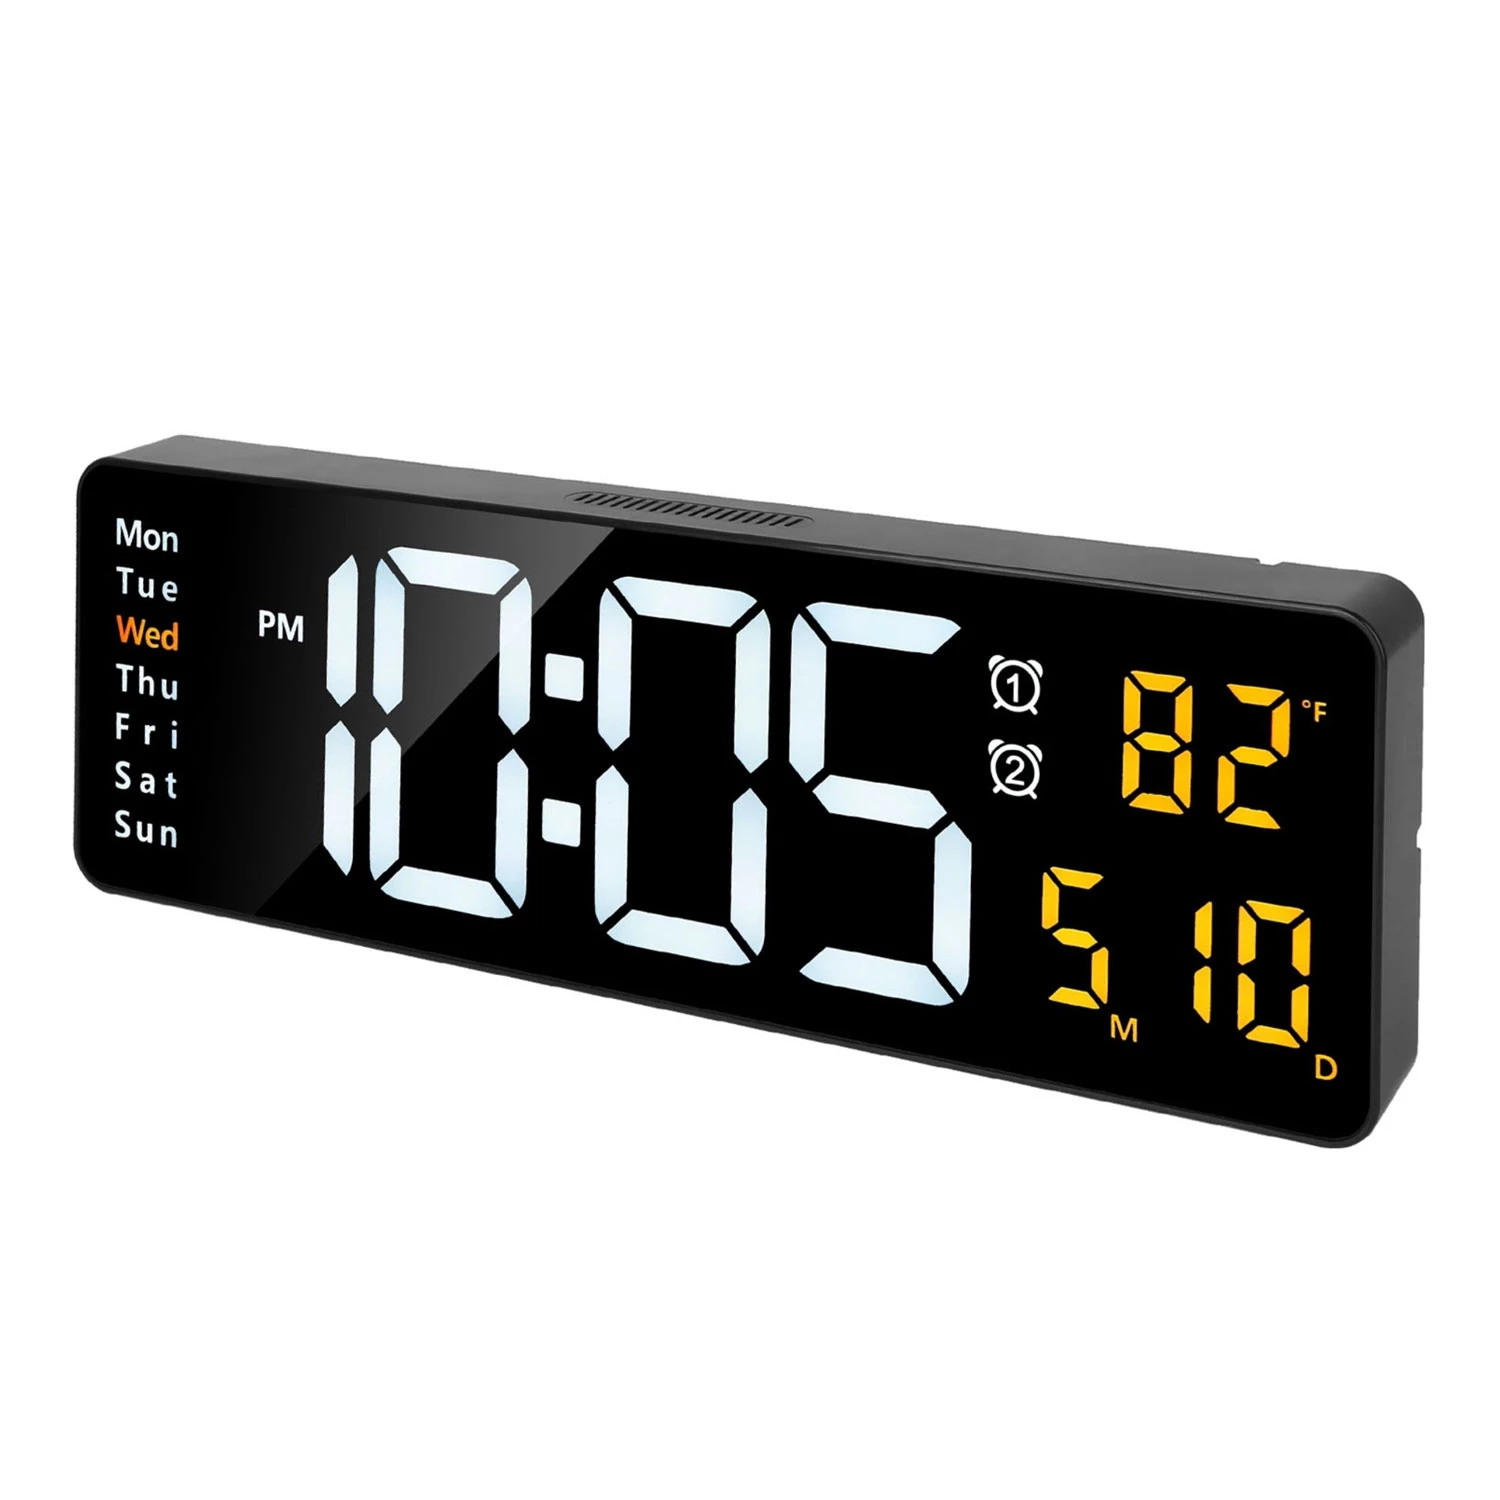 LED Wall Clock with Remote Control - 15.7in, 10 Brightness Levels, 3 Alarms, Countdown, Calendar